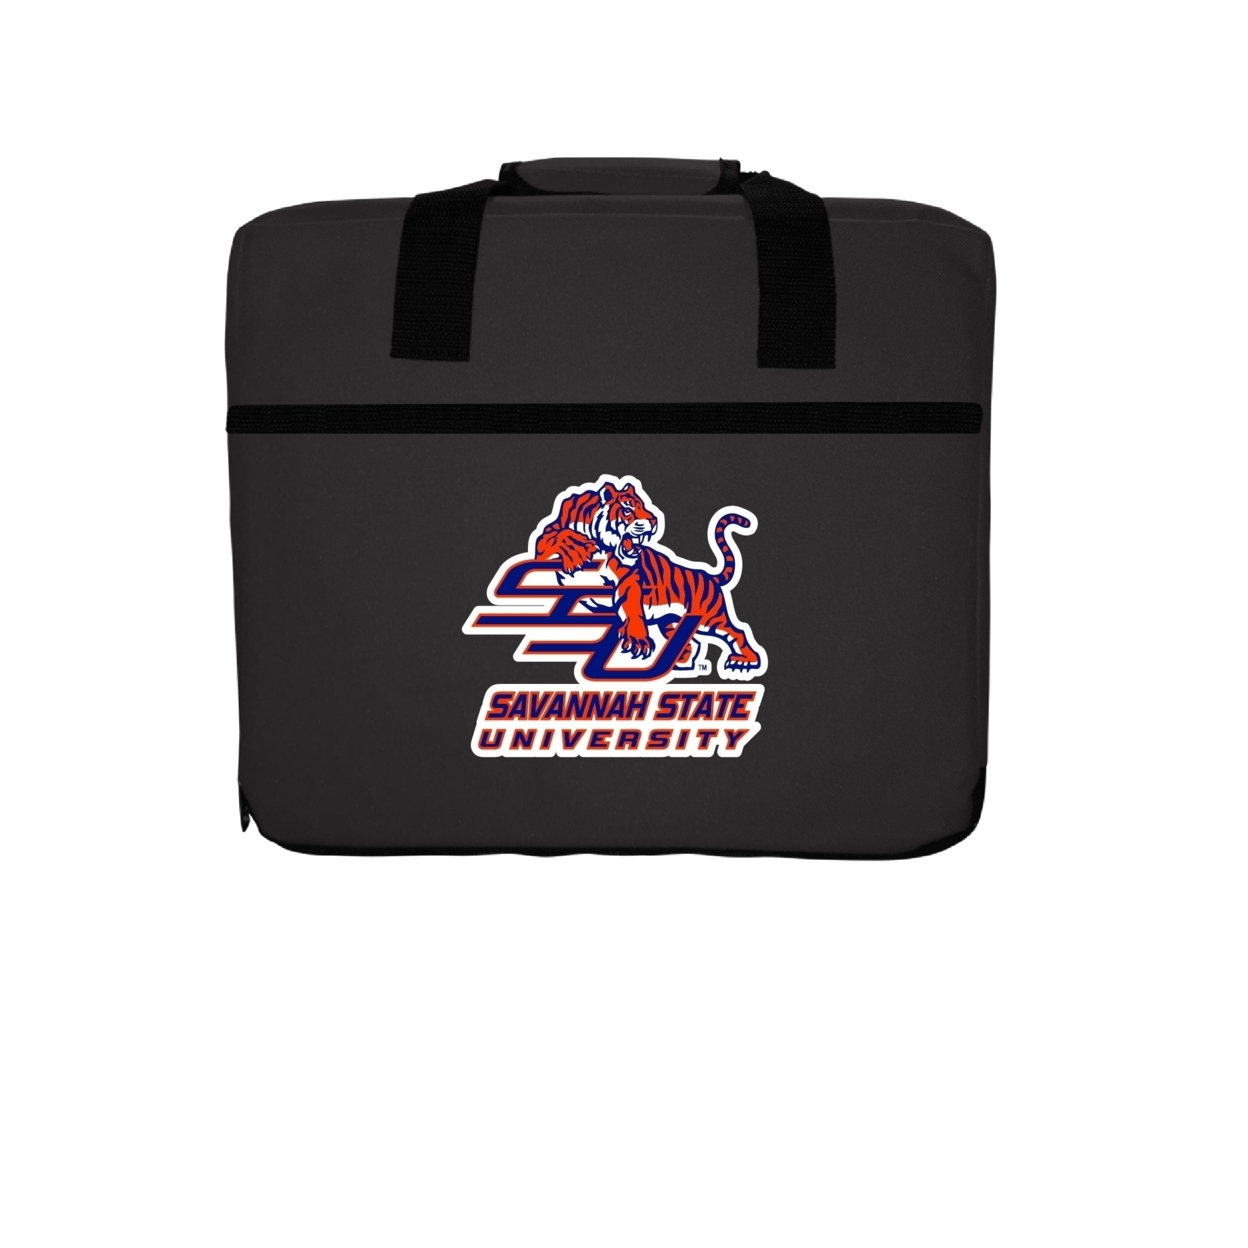 R And R Imports Savannah State University Double Sided Seat Cushion